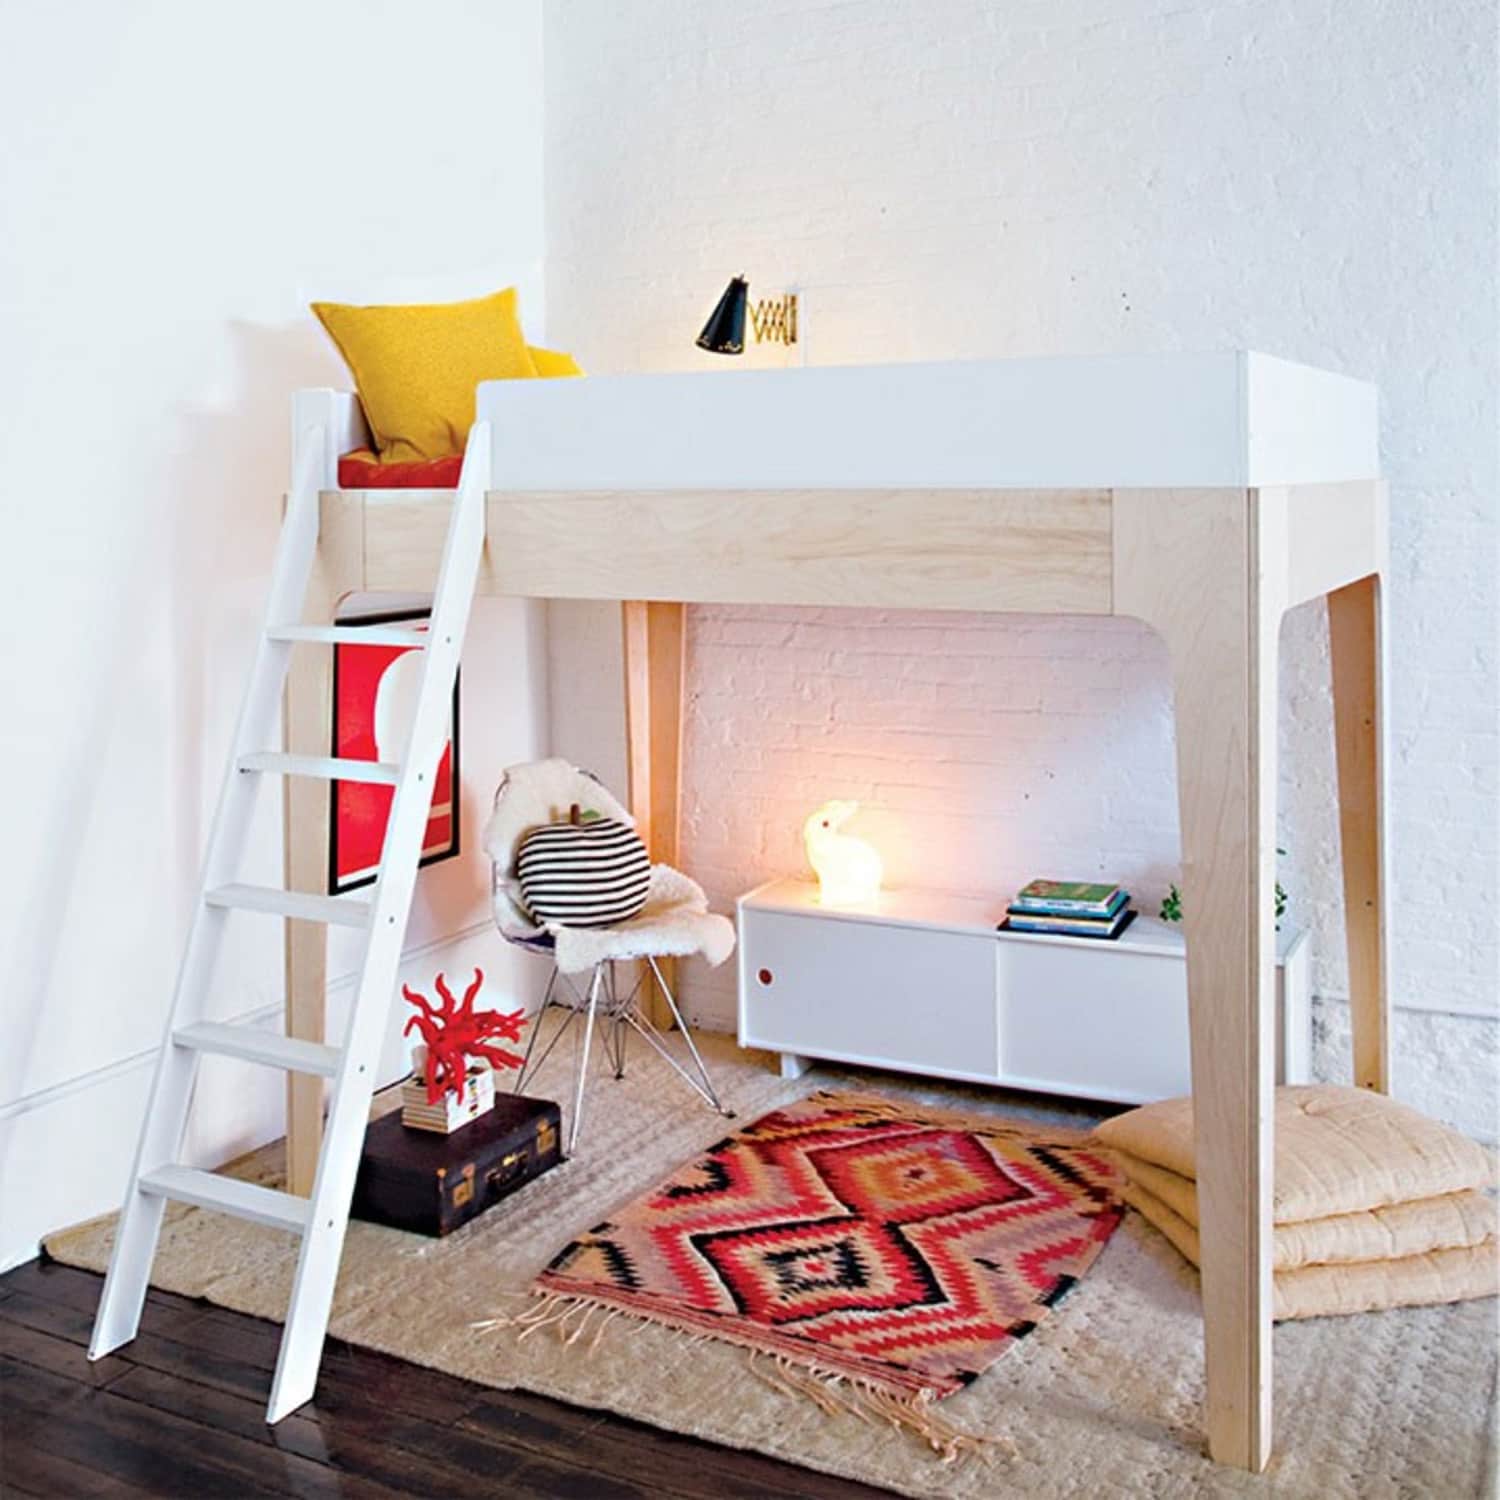 Minimalist Modern Loft Bed for Small Space